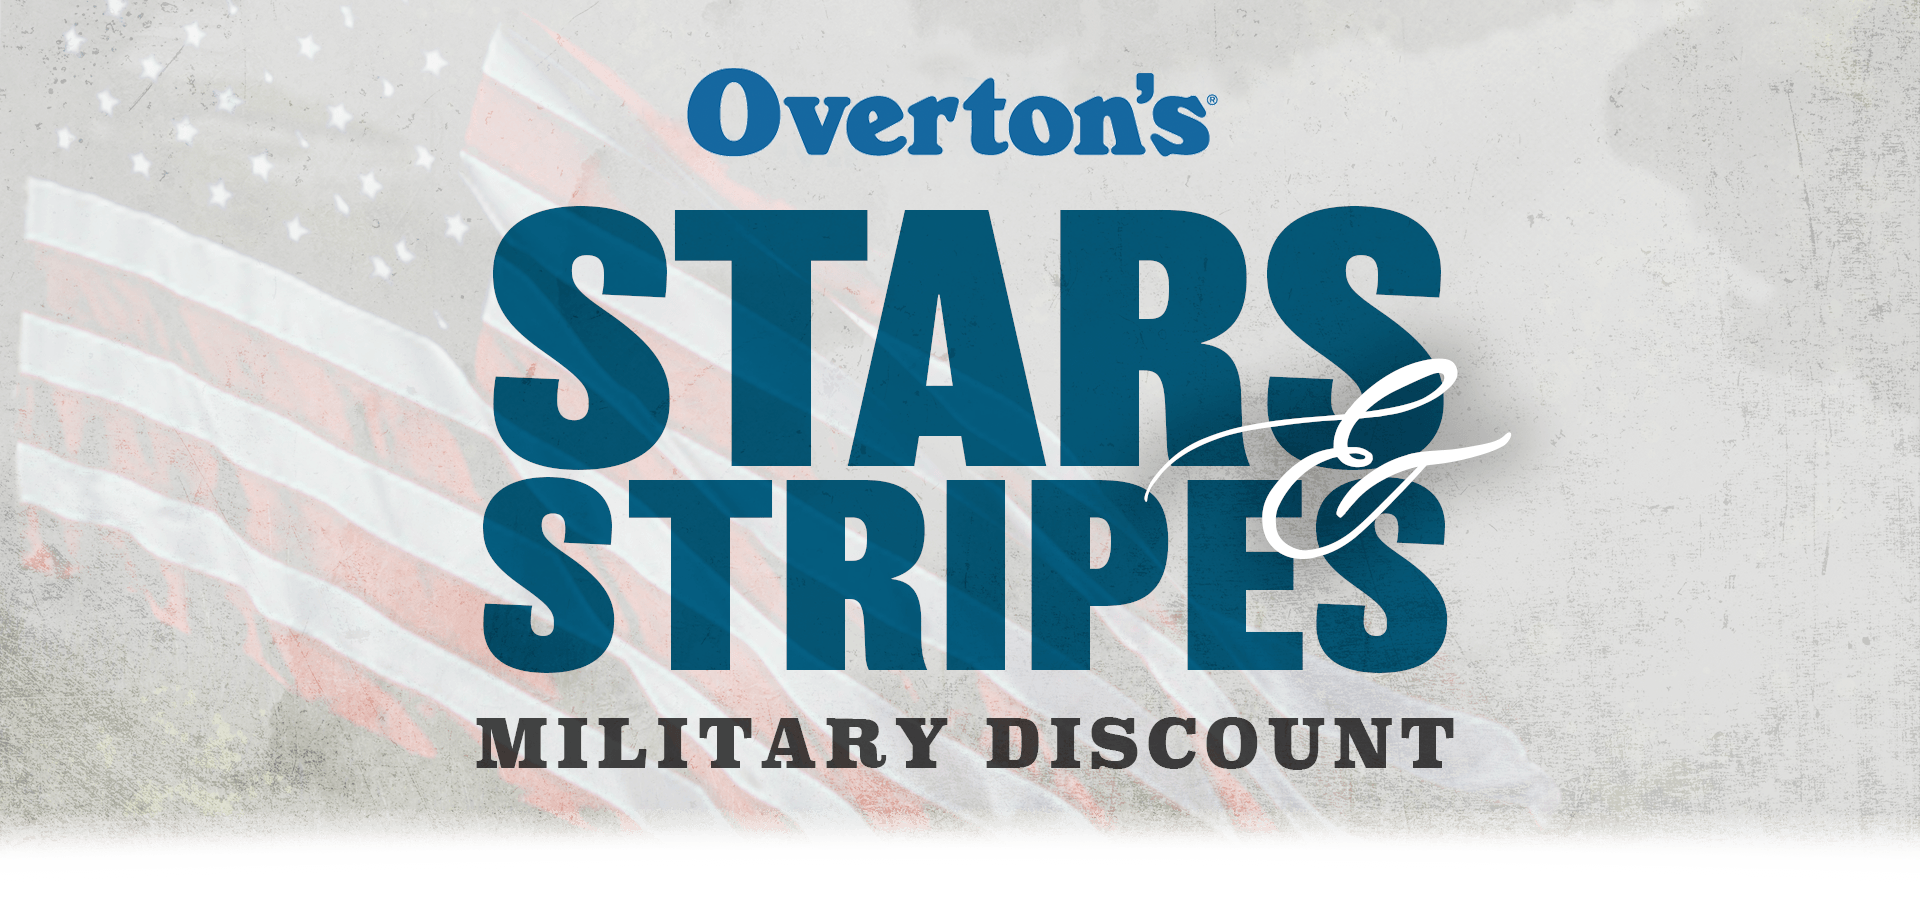 Overton's Star Stripes Military Discount